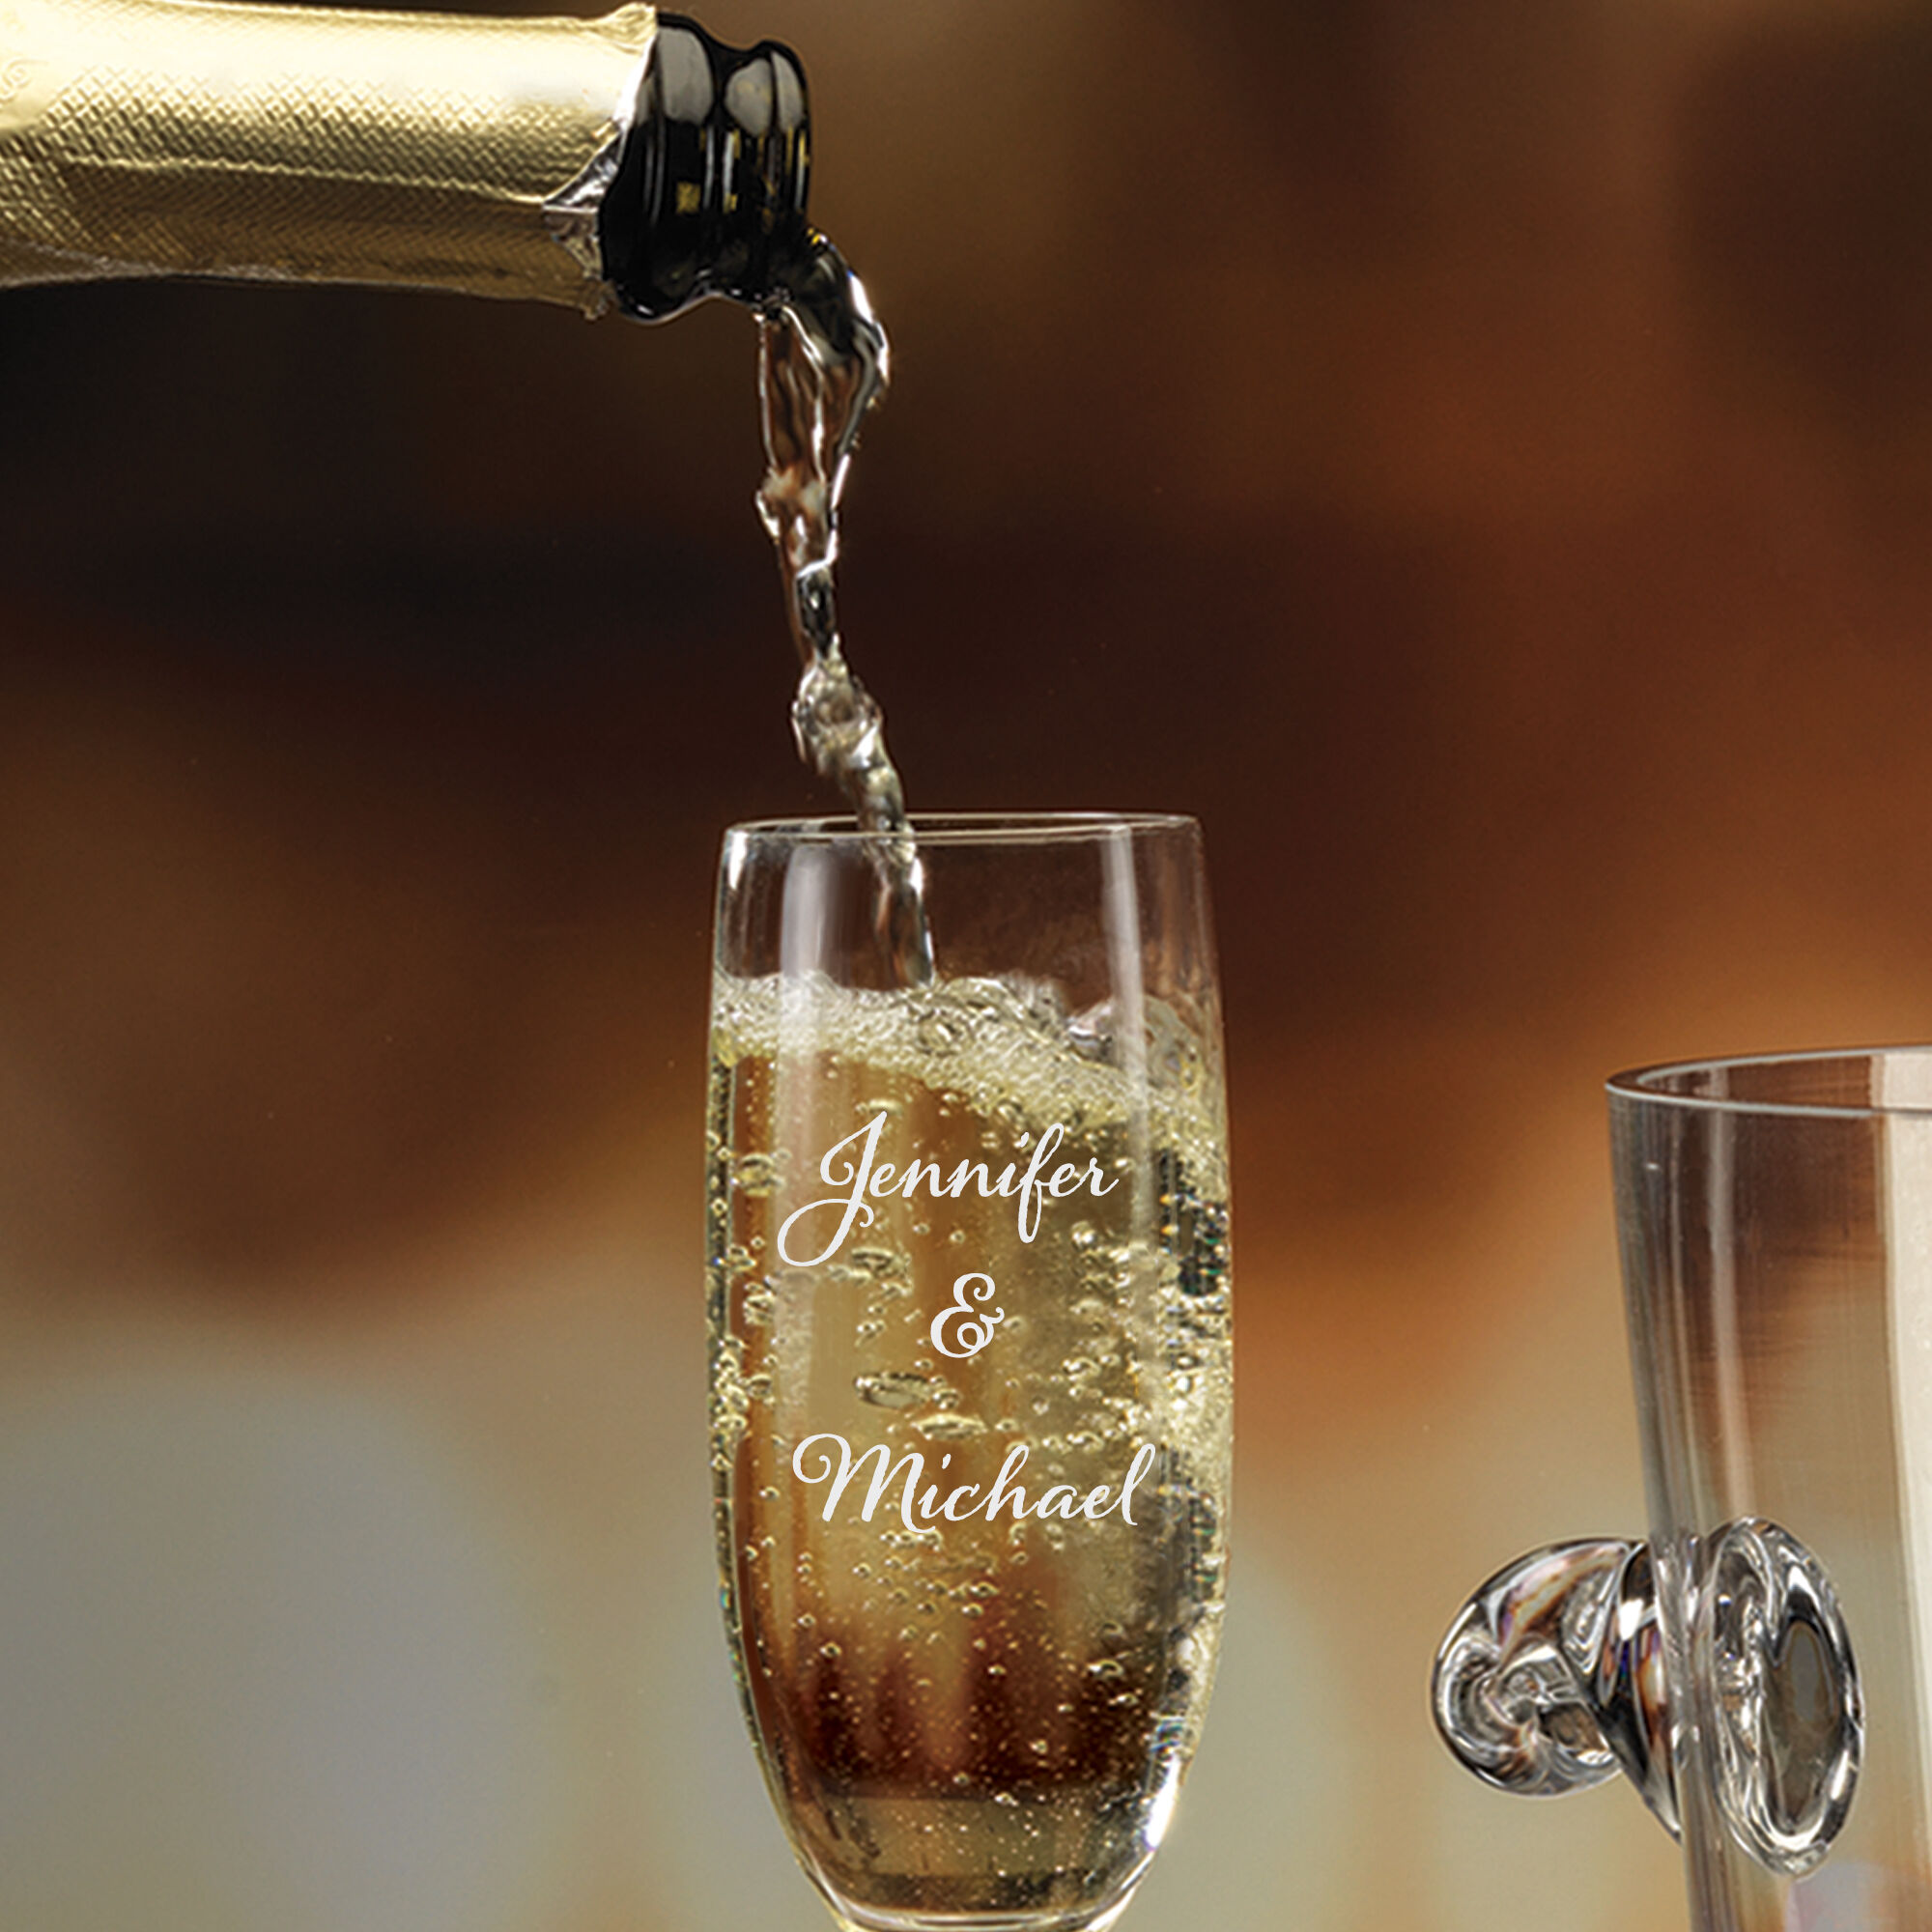 The Personalized Couples Champagne Set 10036 0023 c pouring champagne